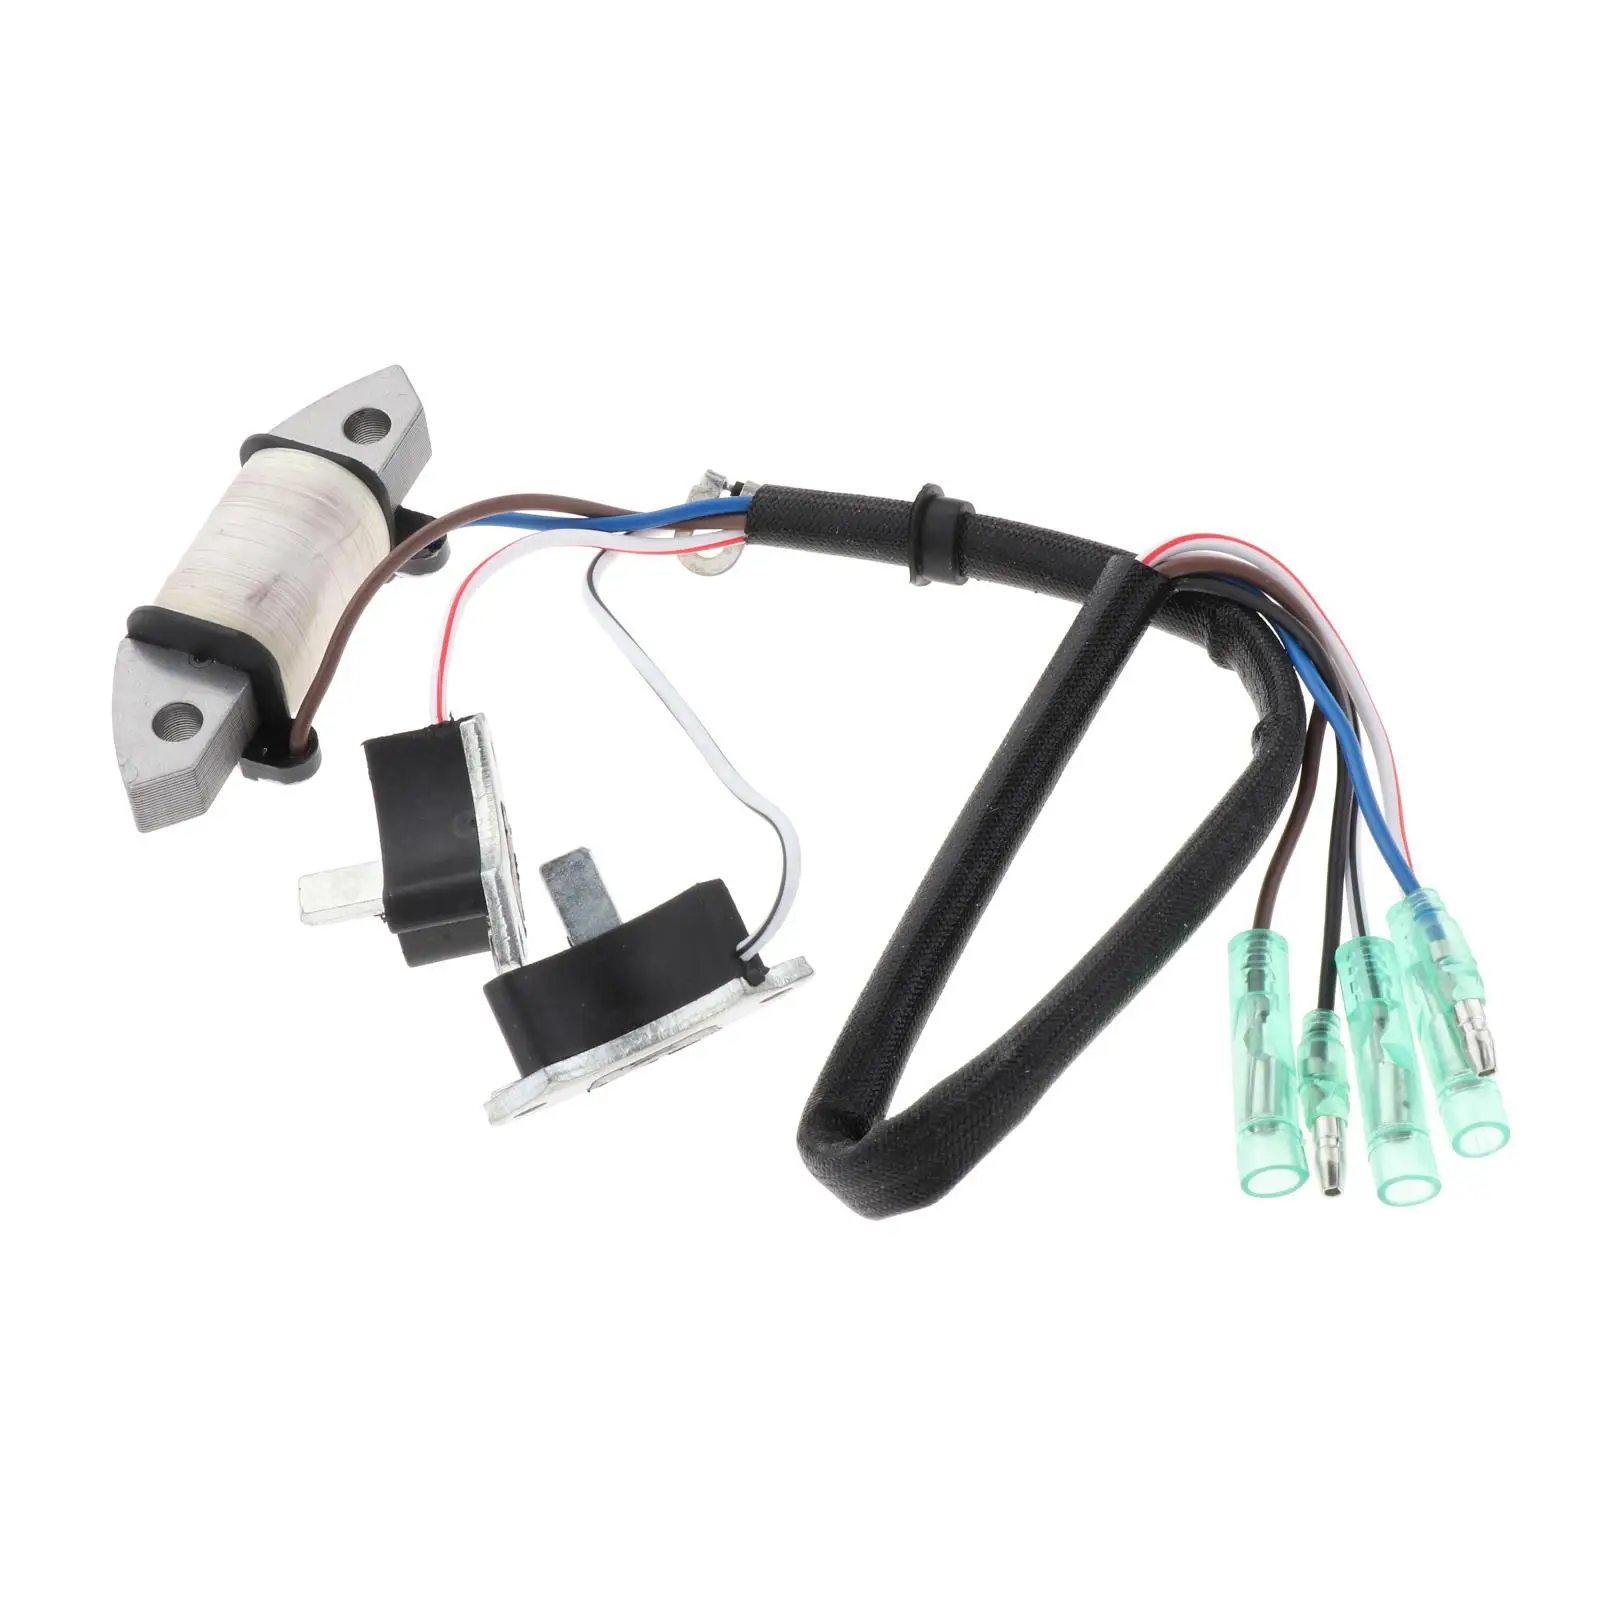 Charge Coil 61541 -85541 -85541 69P-85541-09 for  Outboard Motor 25 Stroke Direct replacement for the old or damaged one,